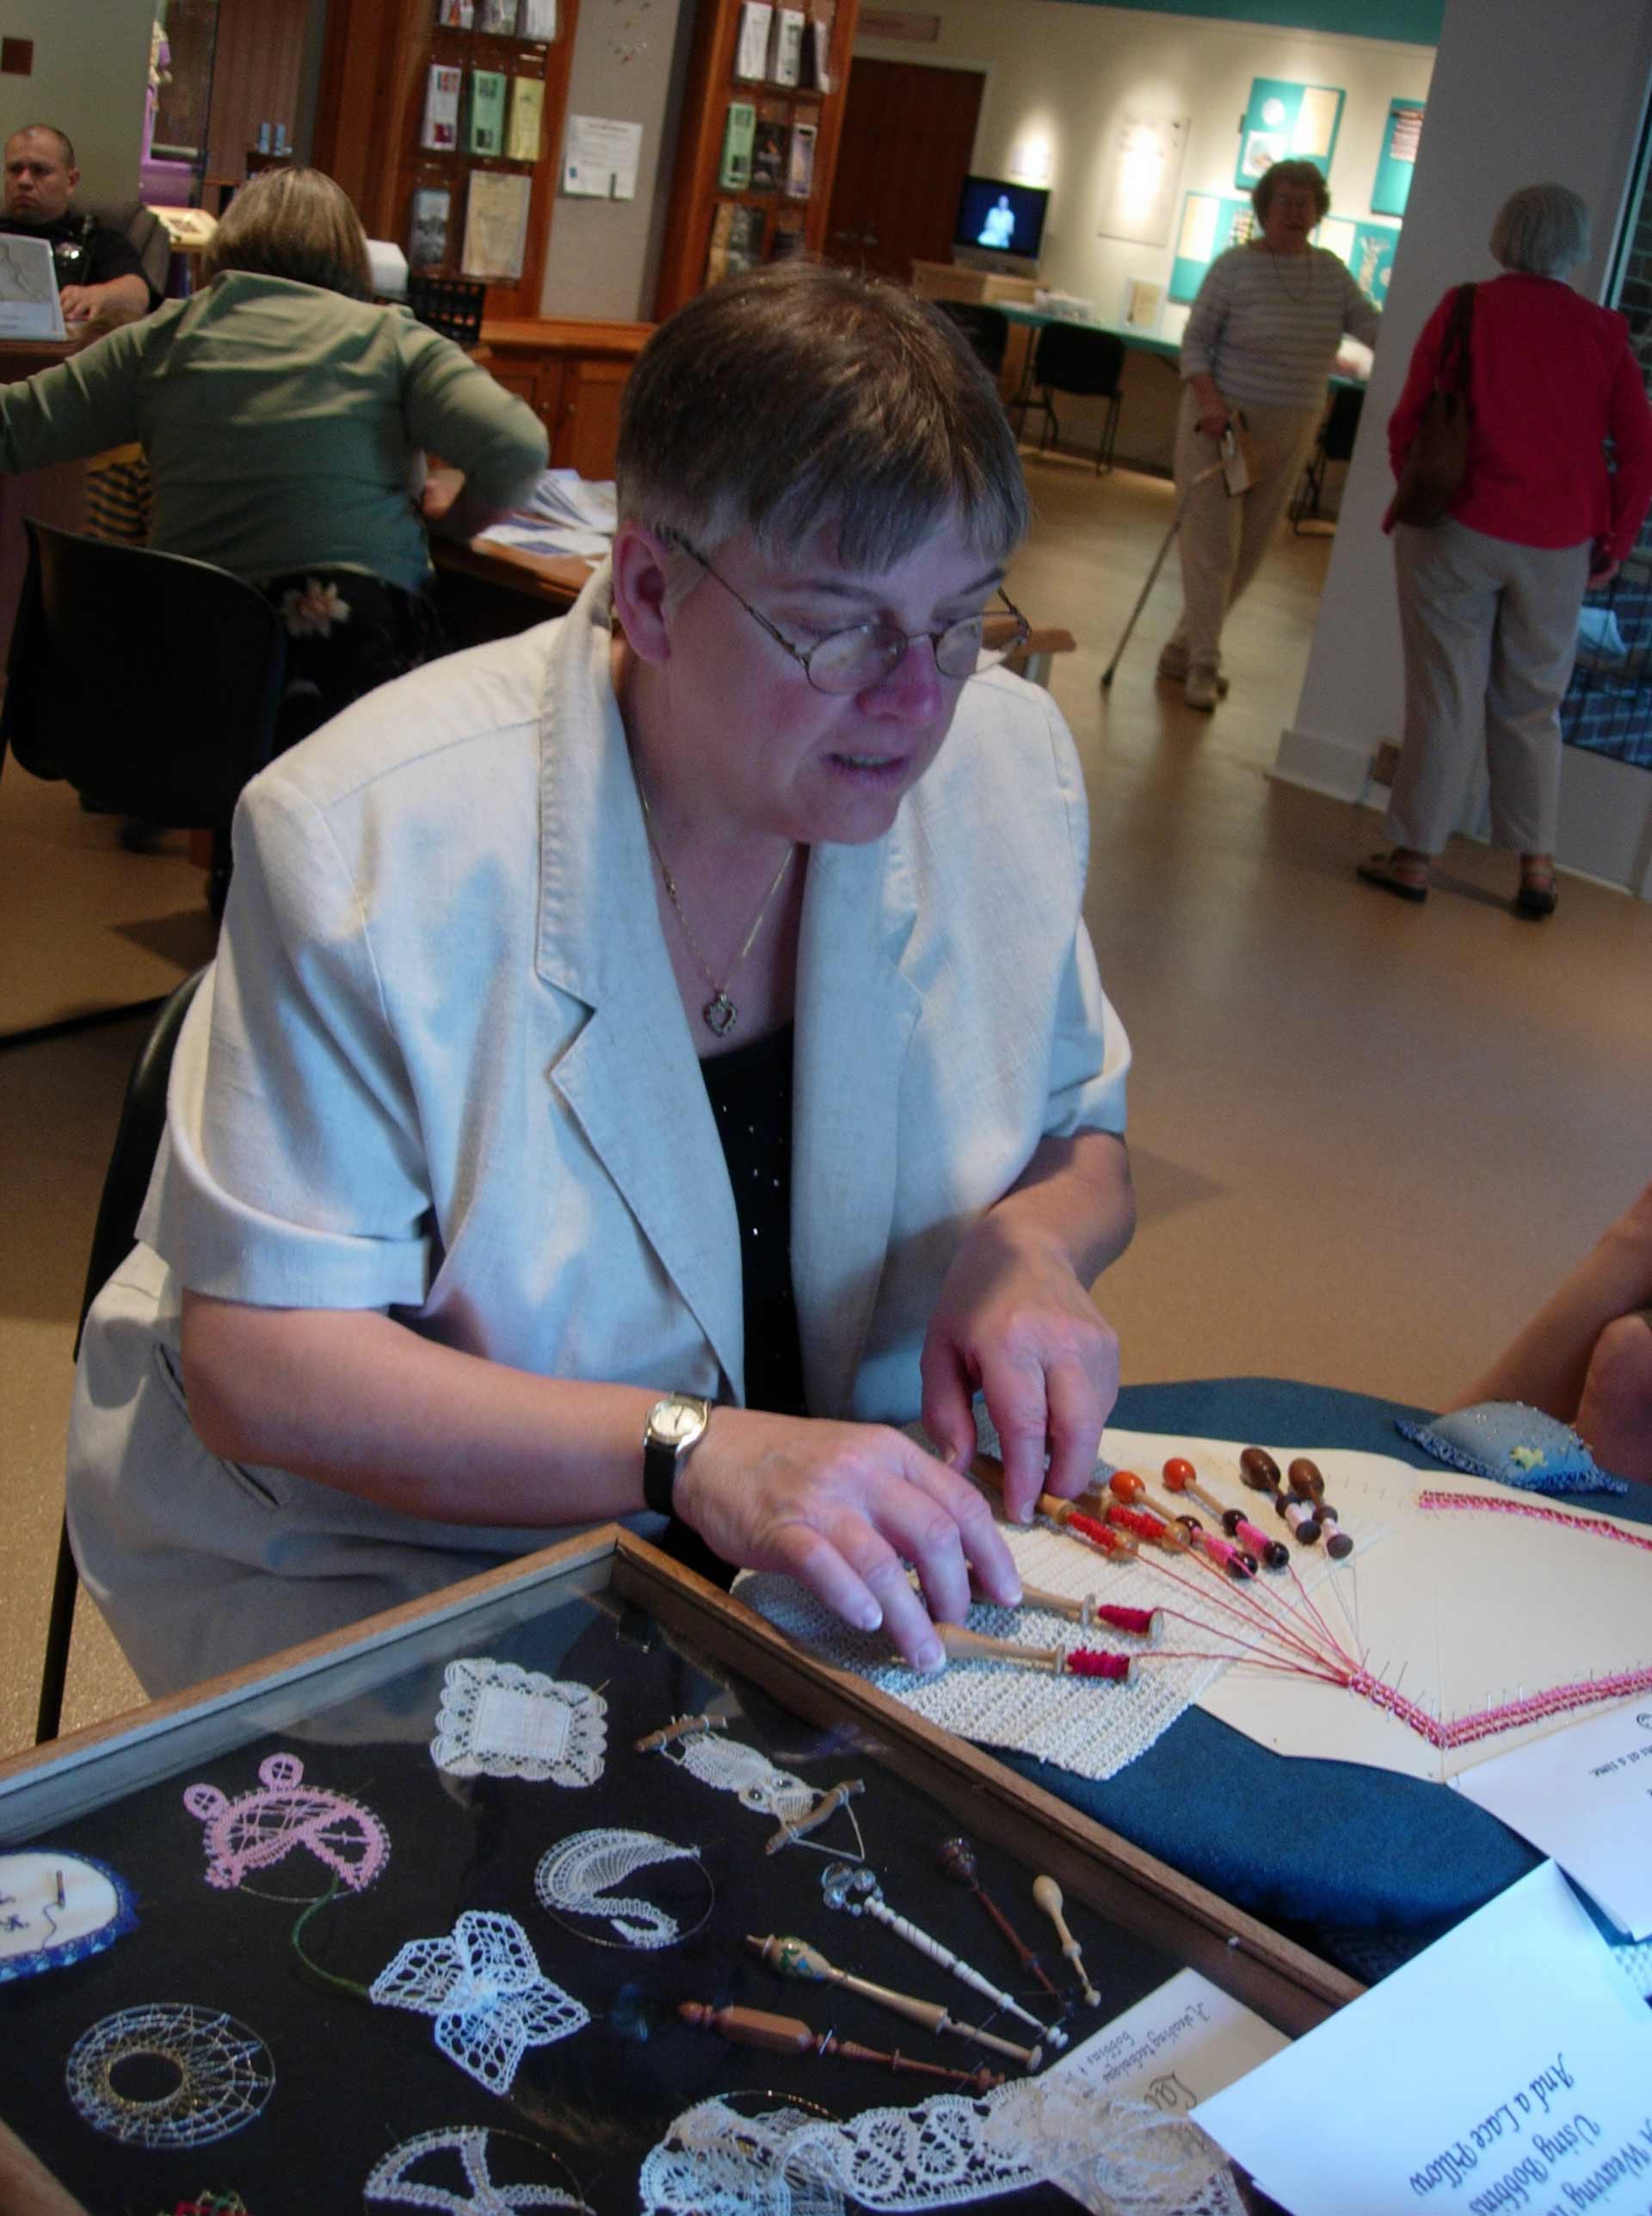 A woman wearing glasses sitting at a table with crafts 